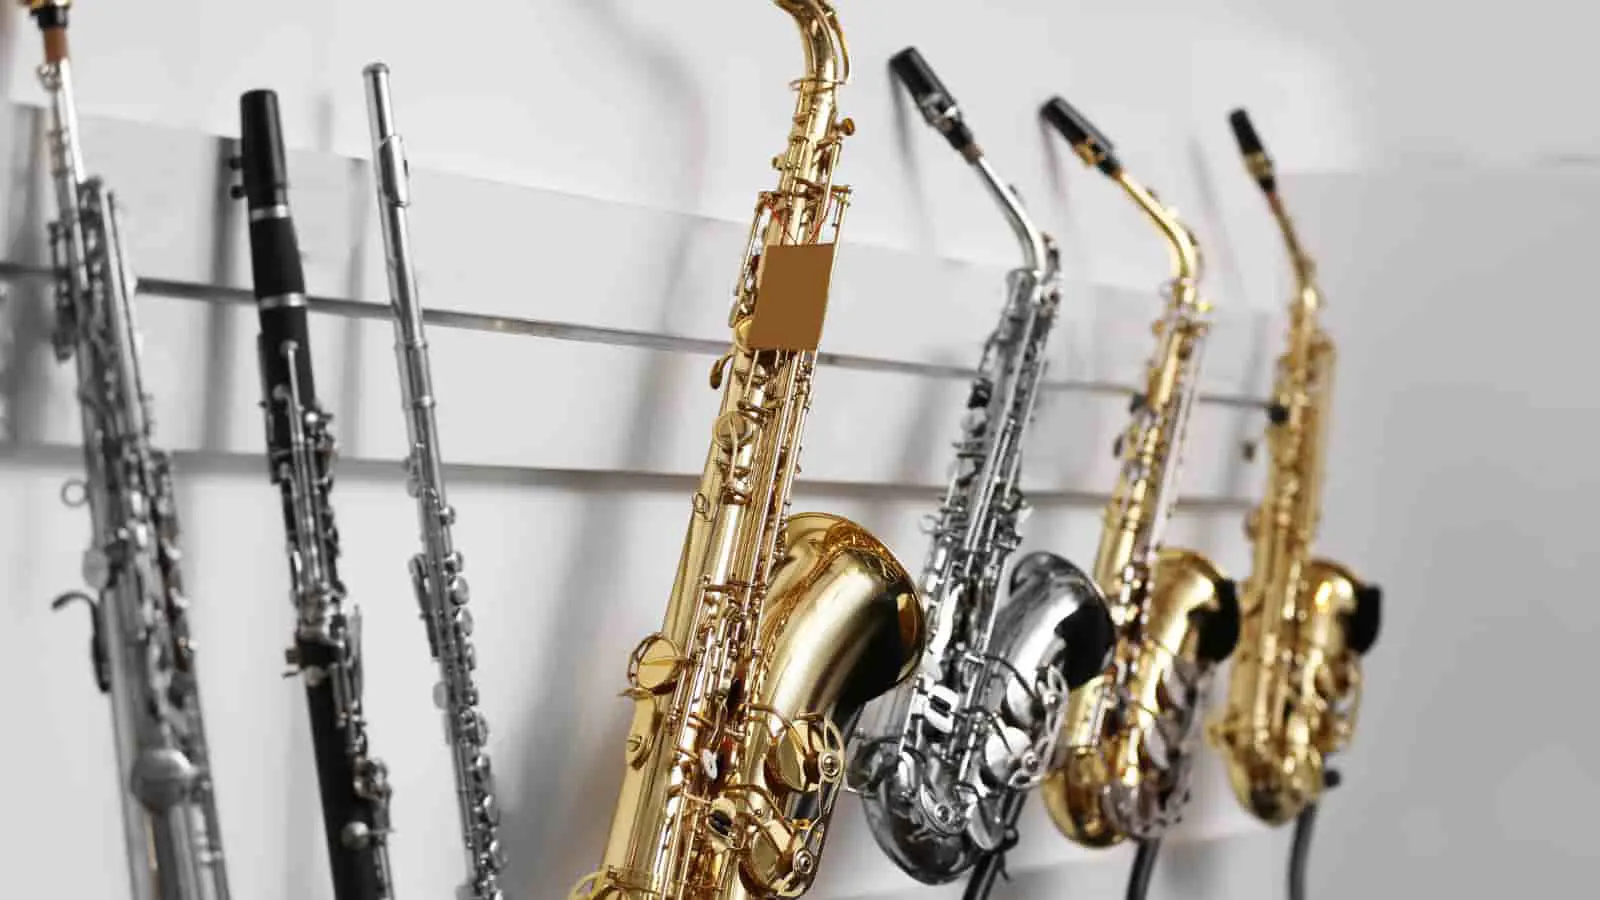 Flute Versus Saxophone: Which is Easier to Learn?